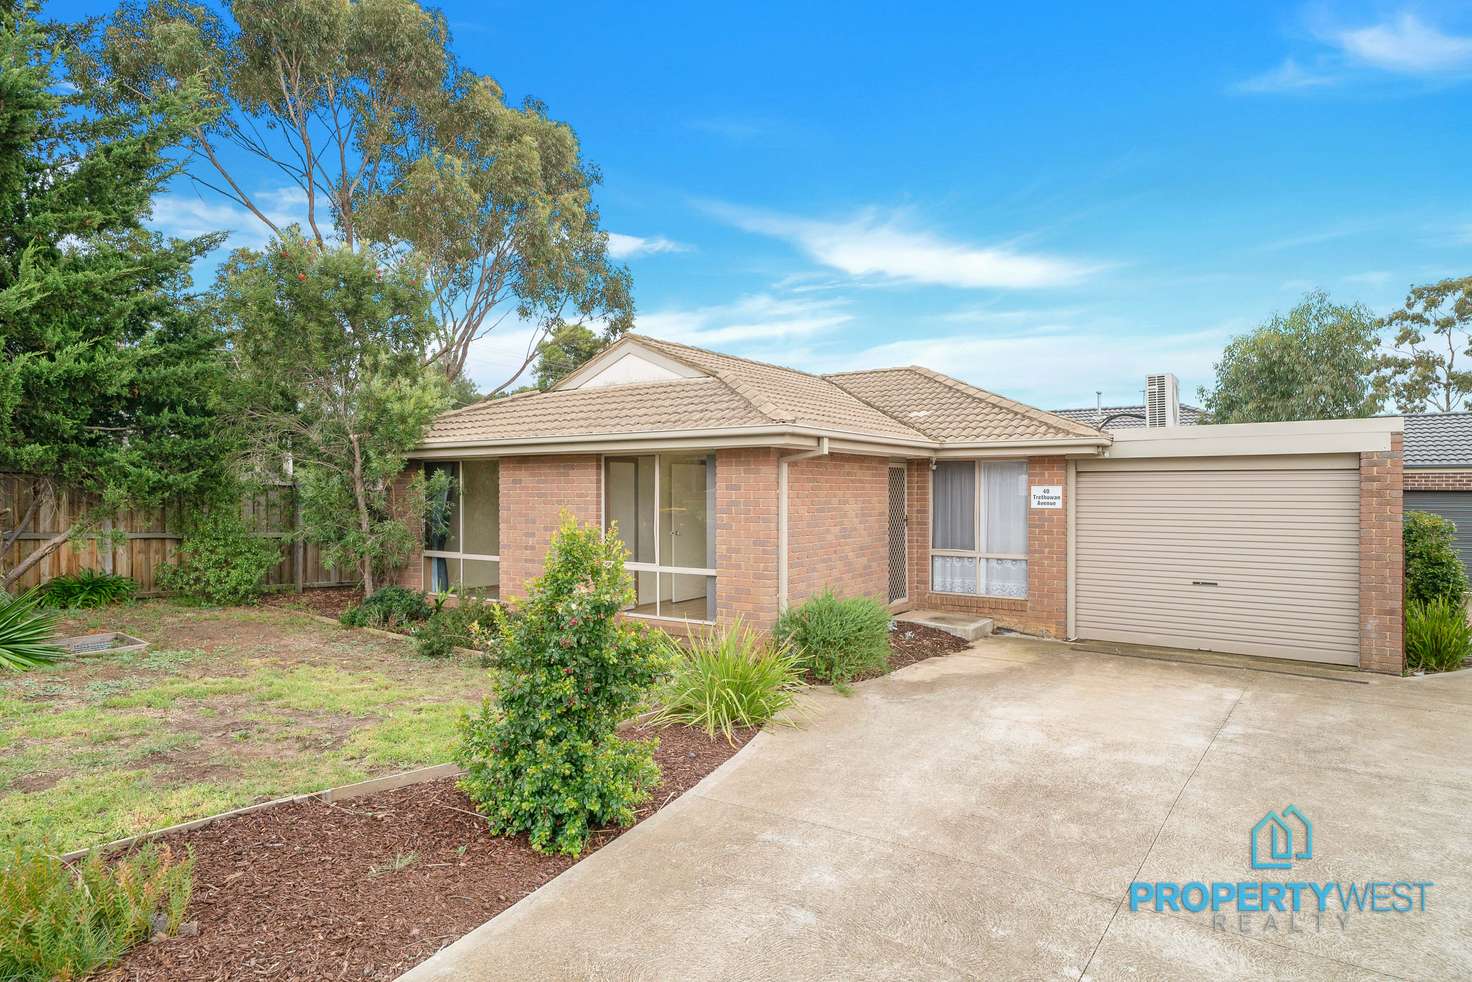 Main view of Homely house listing, 40 Trethowan Ave, Melton West VIC 3337